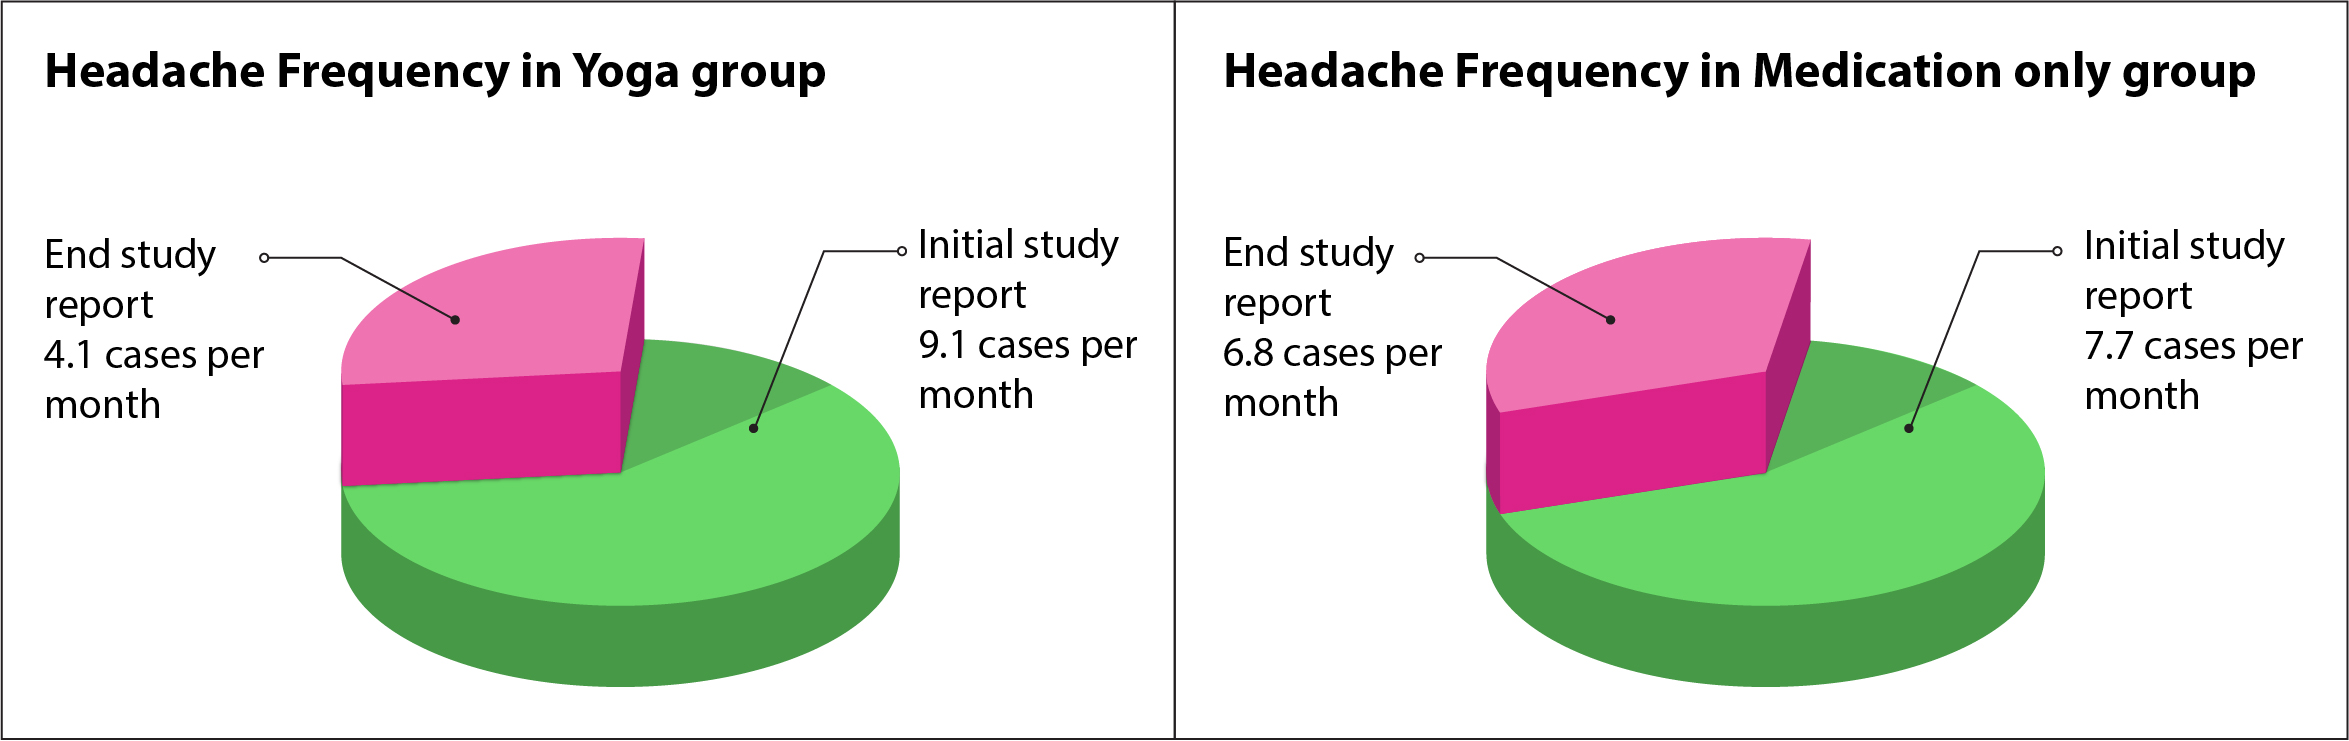 headache frequency medication-only group 